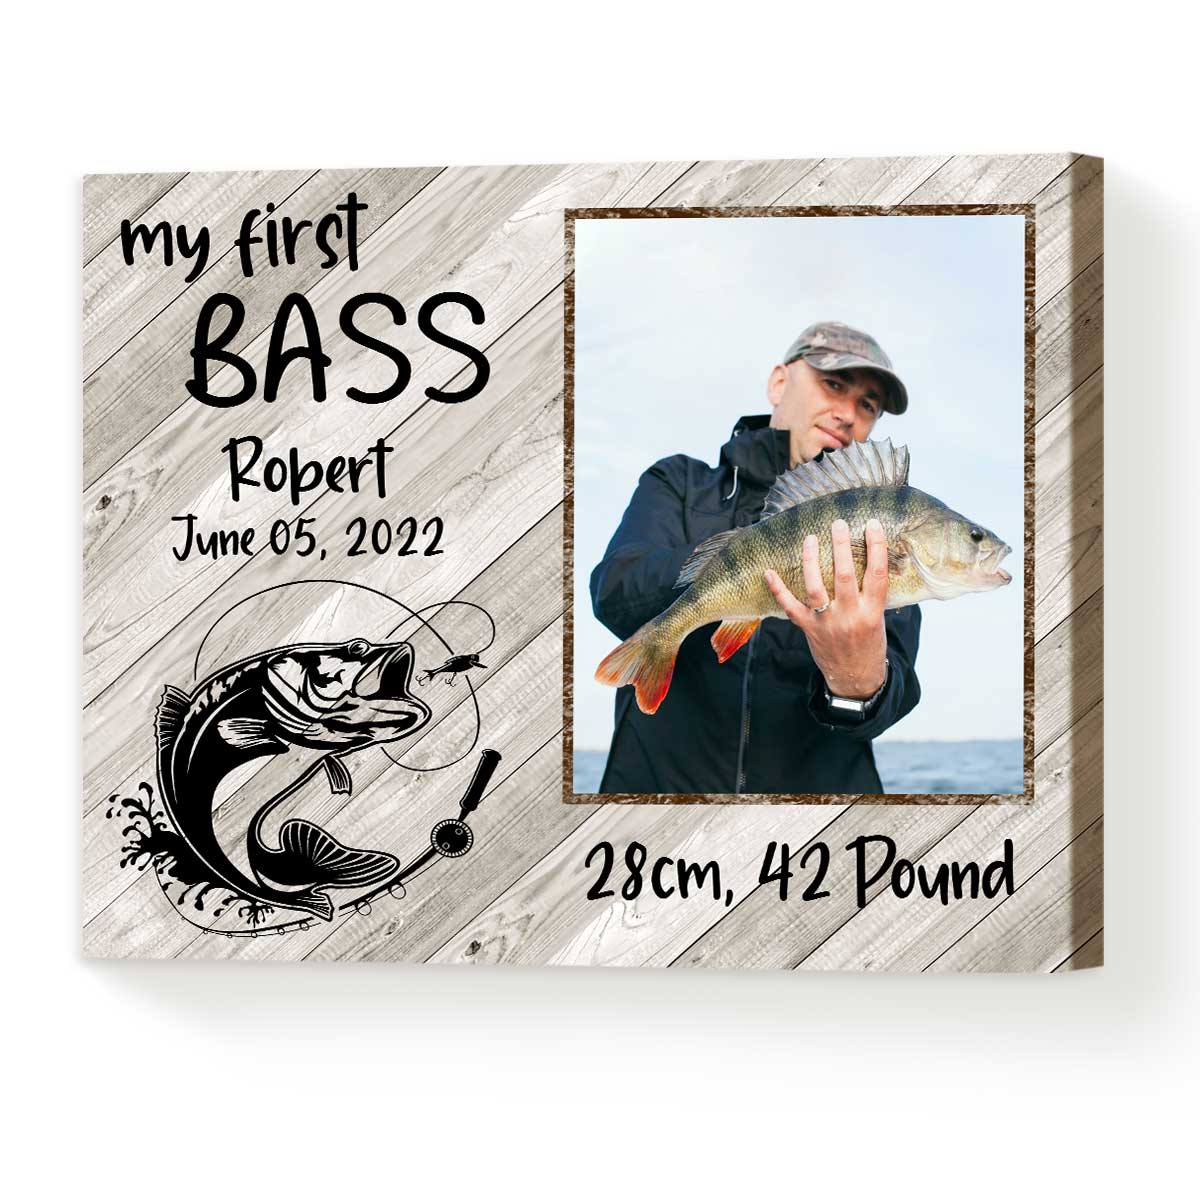 My First Bass Photo Gift Canvas, Custom Fishing Gift For Men, Father's Day  Fishing Gift for Grandpa, Best Gifts for Fisherman - Wrapped Canvas, 14x11